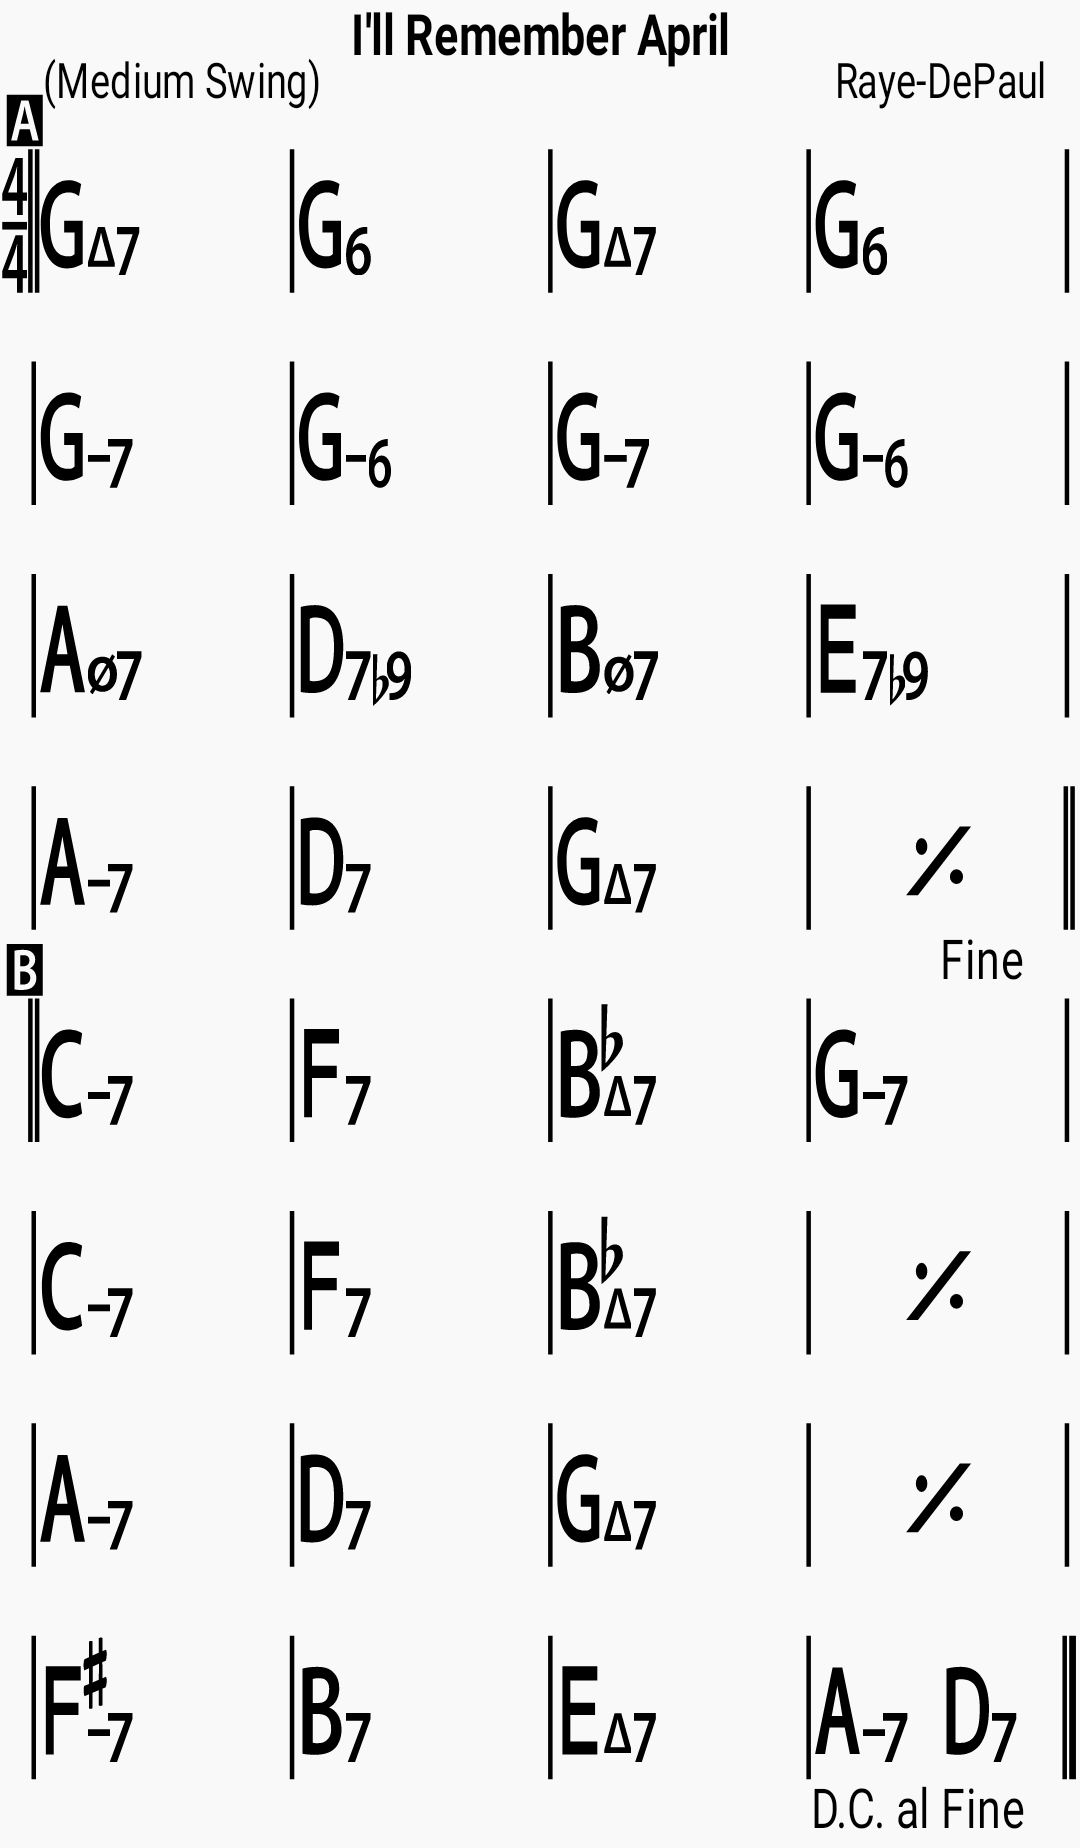 Chord chart for the jazz standard I'll Remember April